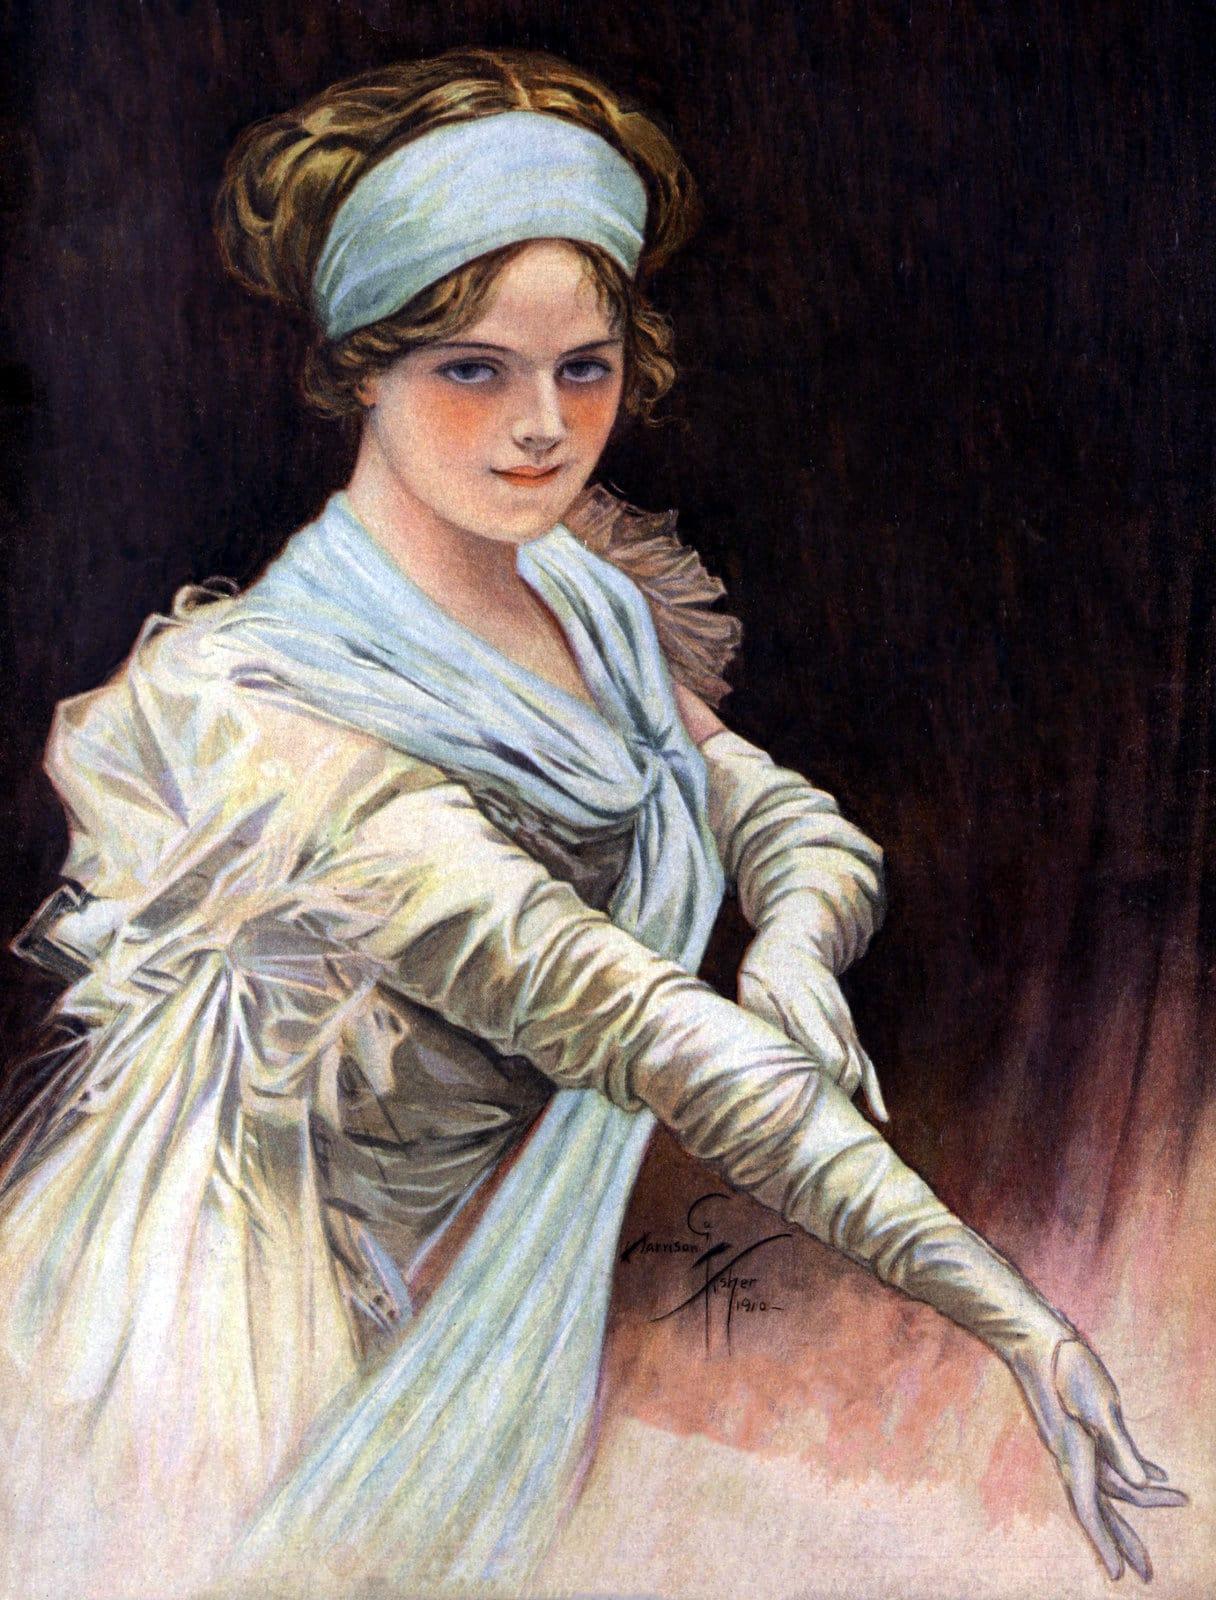 Woman with vintage evening gloves (1910)